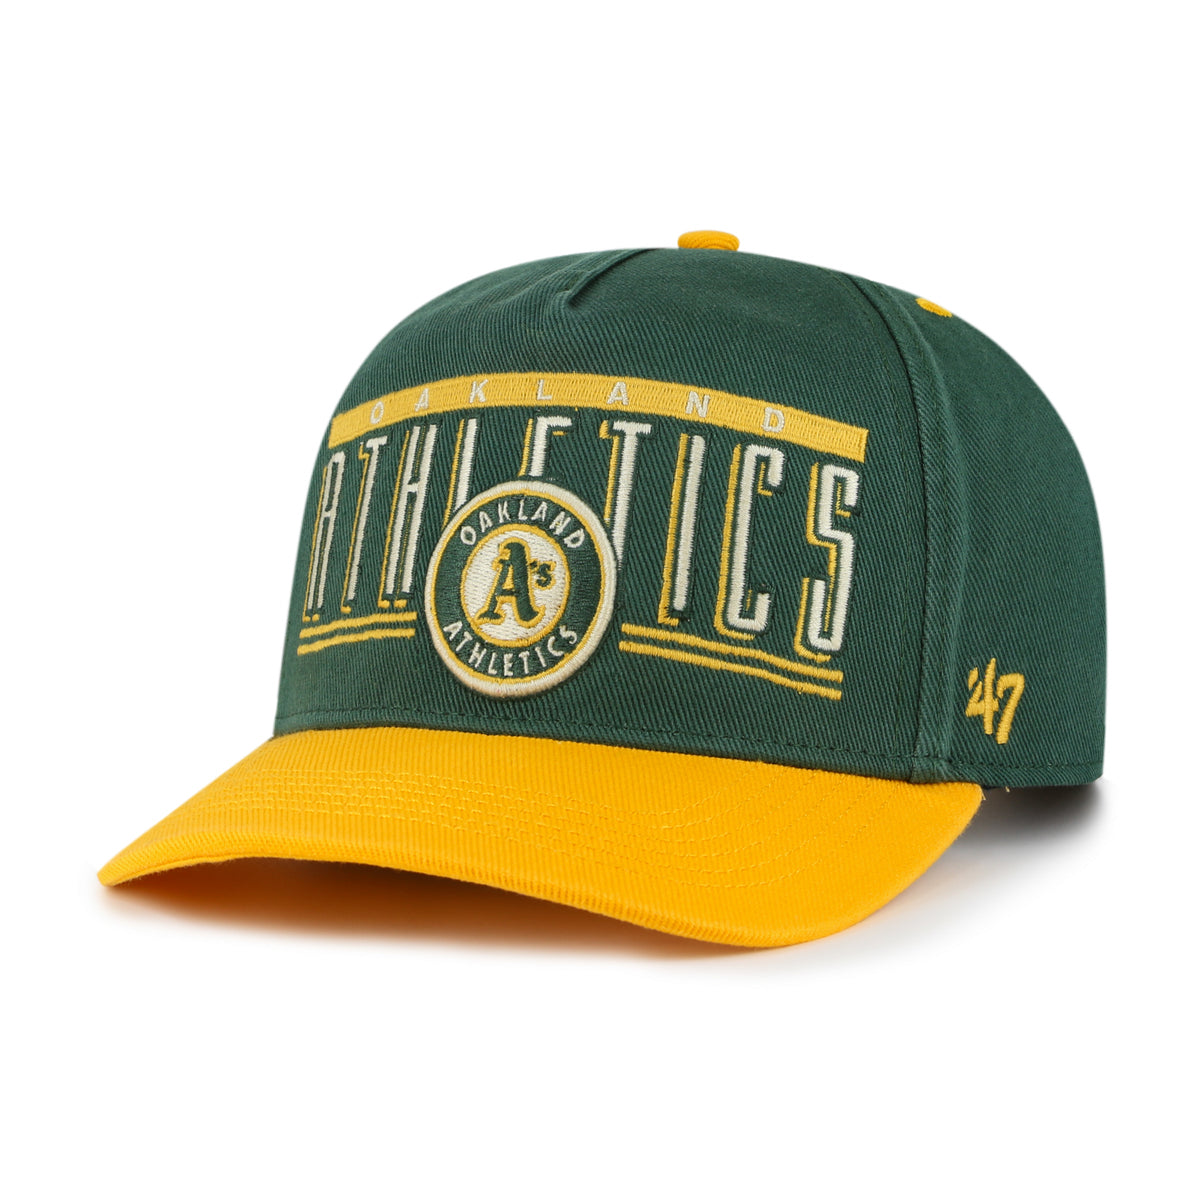 OAKLAND ATHLETICS COOPERSTOWN DOUBLE HEADER BASELINE '47 HITCH